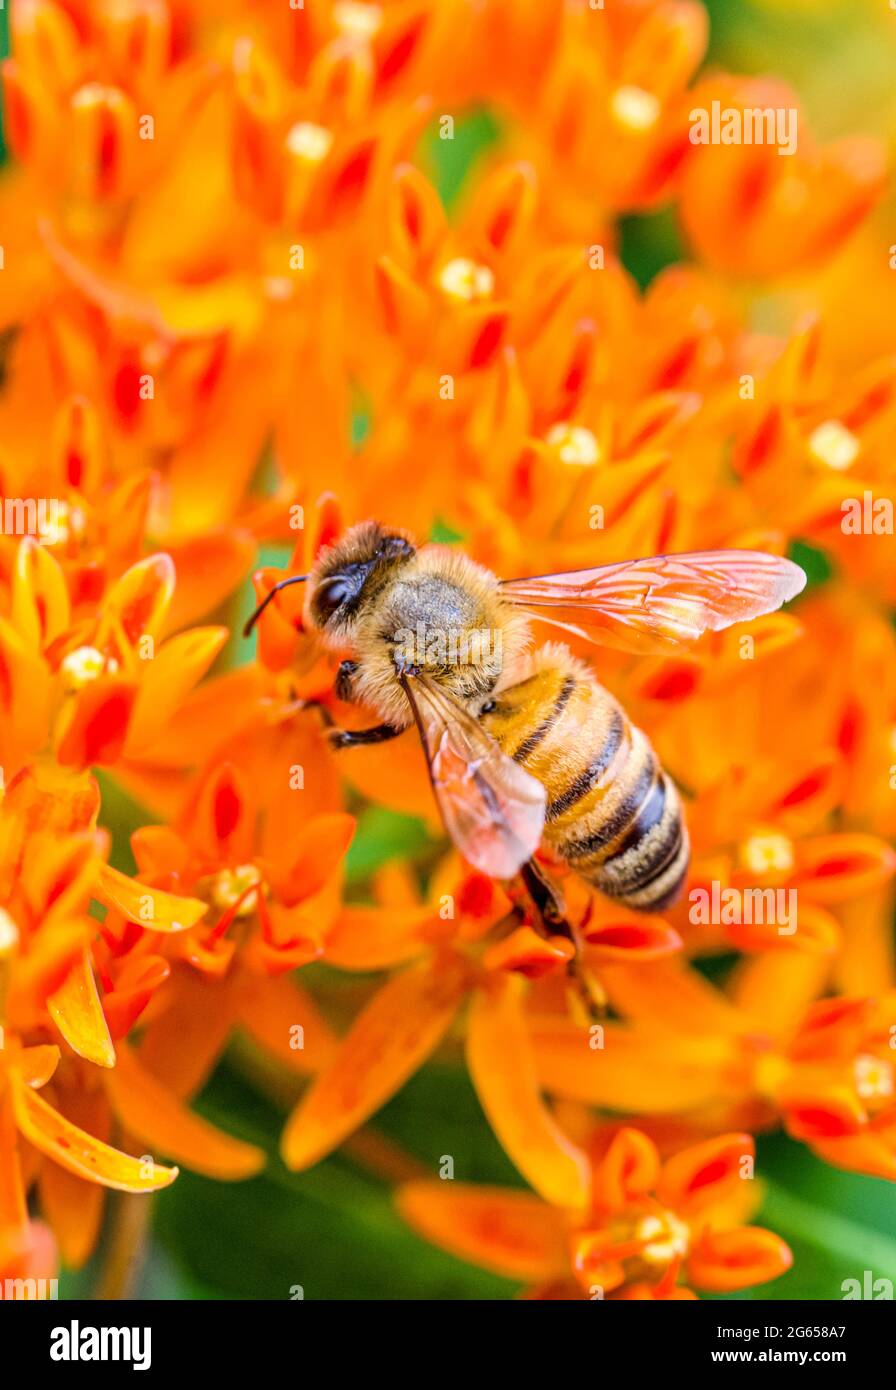 Closeup of a honey bee (Apis mellifera) on the orange flowers of Butterfly weed (Asclepias tuberosa). Stock Photo